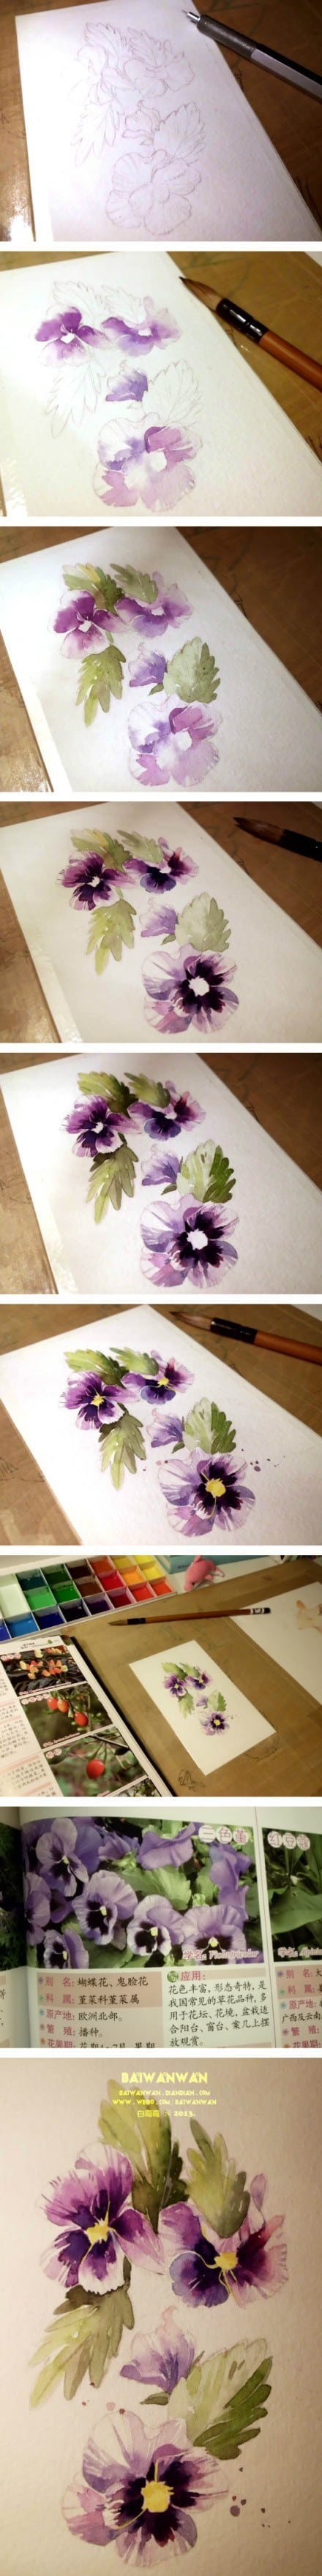 15. START YOUR PAINTING BY ATTACHING THE WATERCOLOR PAPER ON A WOODEN BOARD